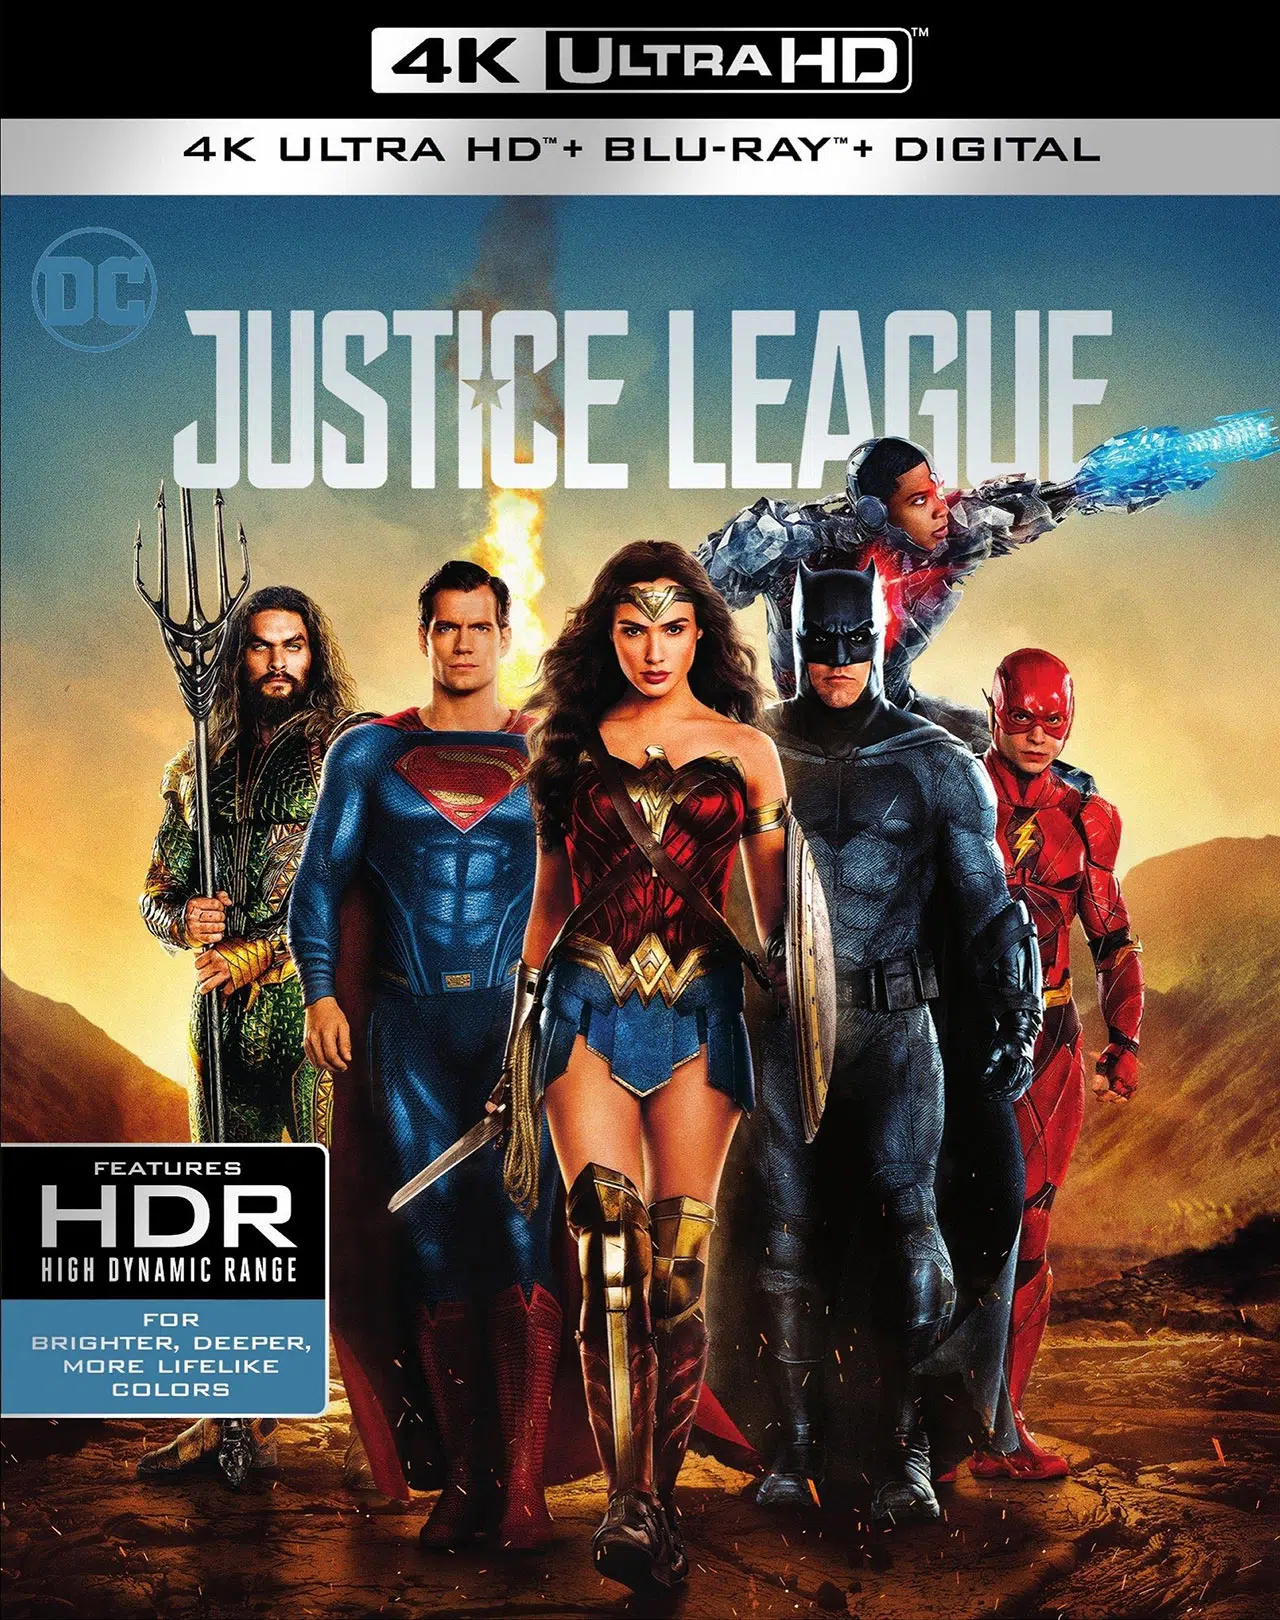 Justice League 4K HDR Blu-ray